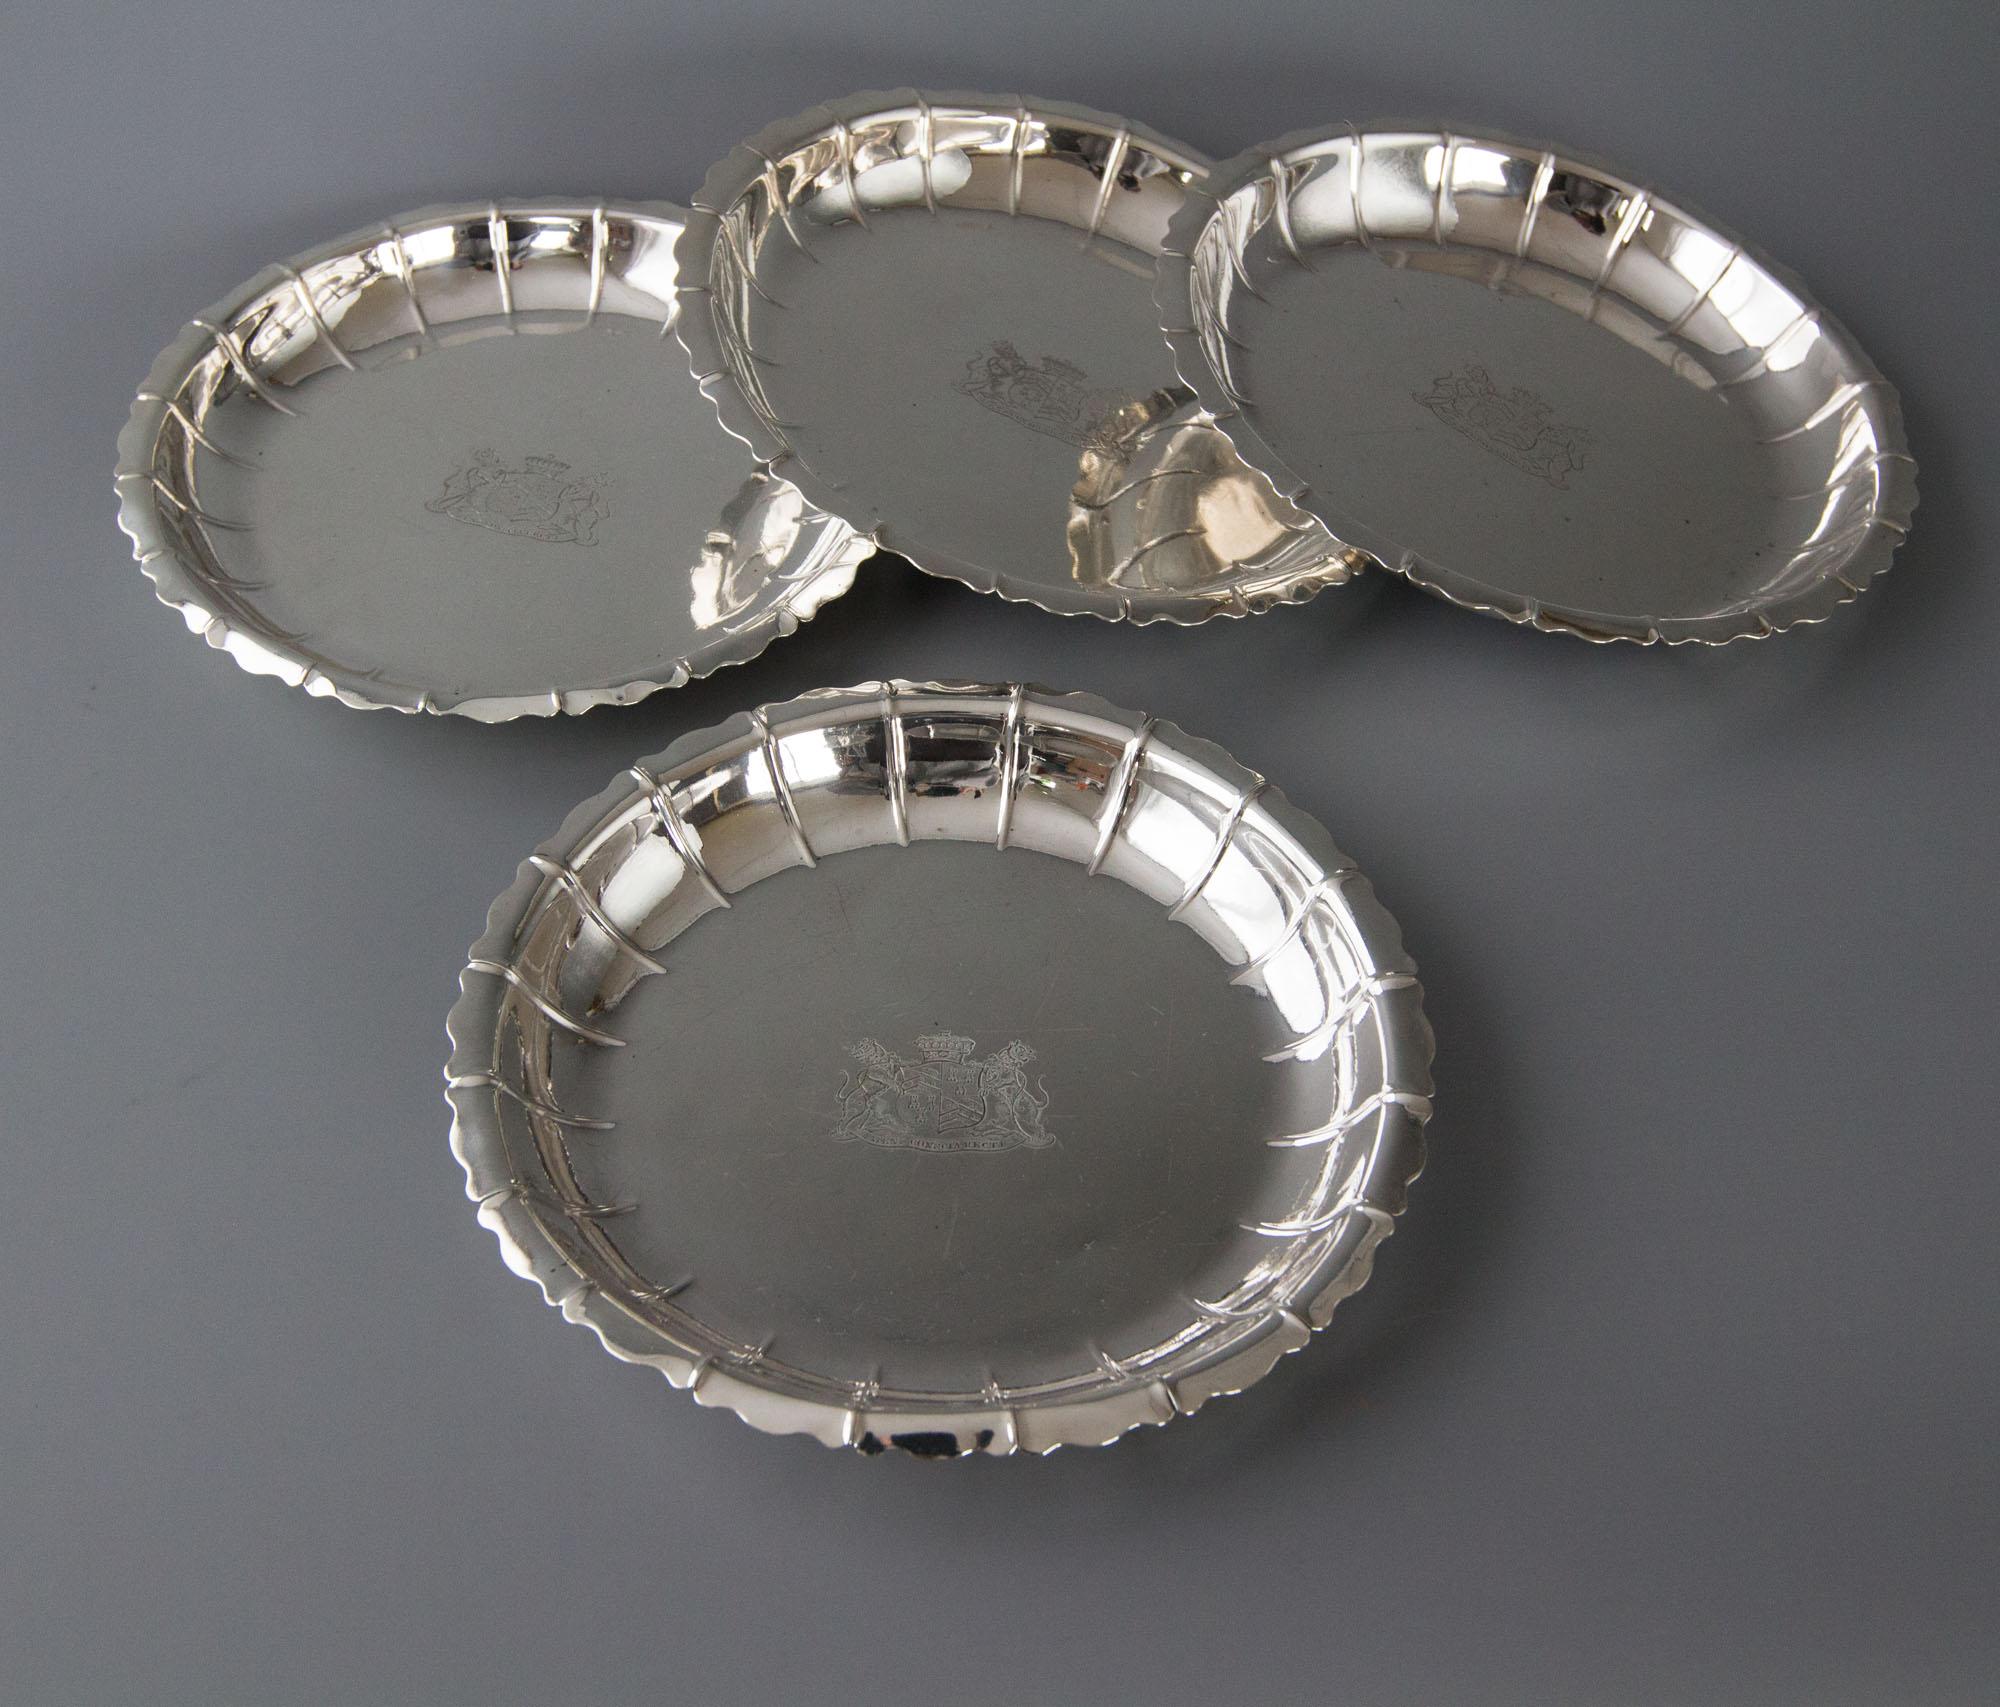 English Set of Four Silver Strawberry or Serving Dishes, London 1835 by Robert Garrard